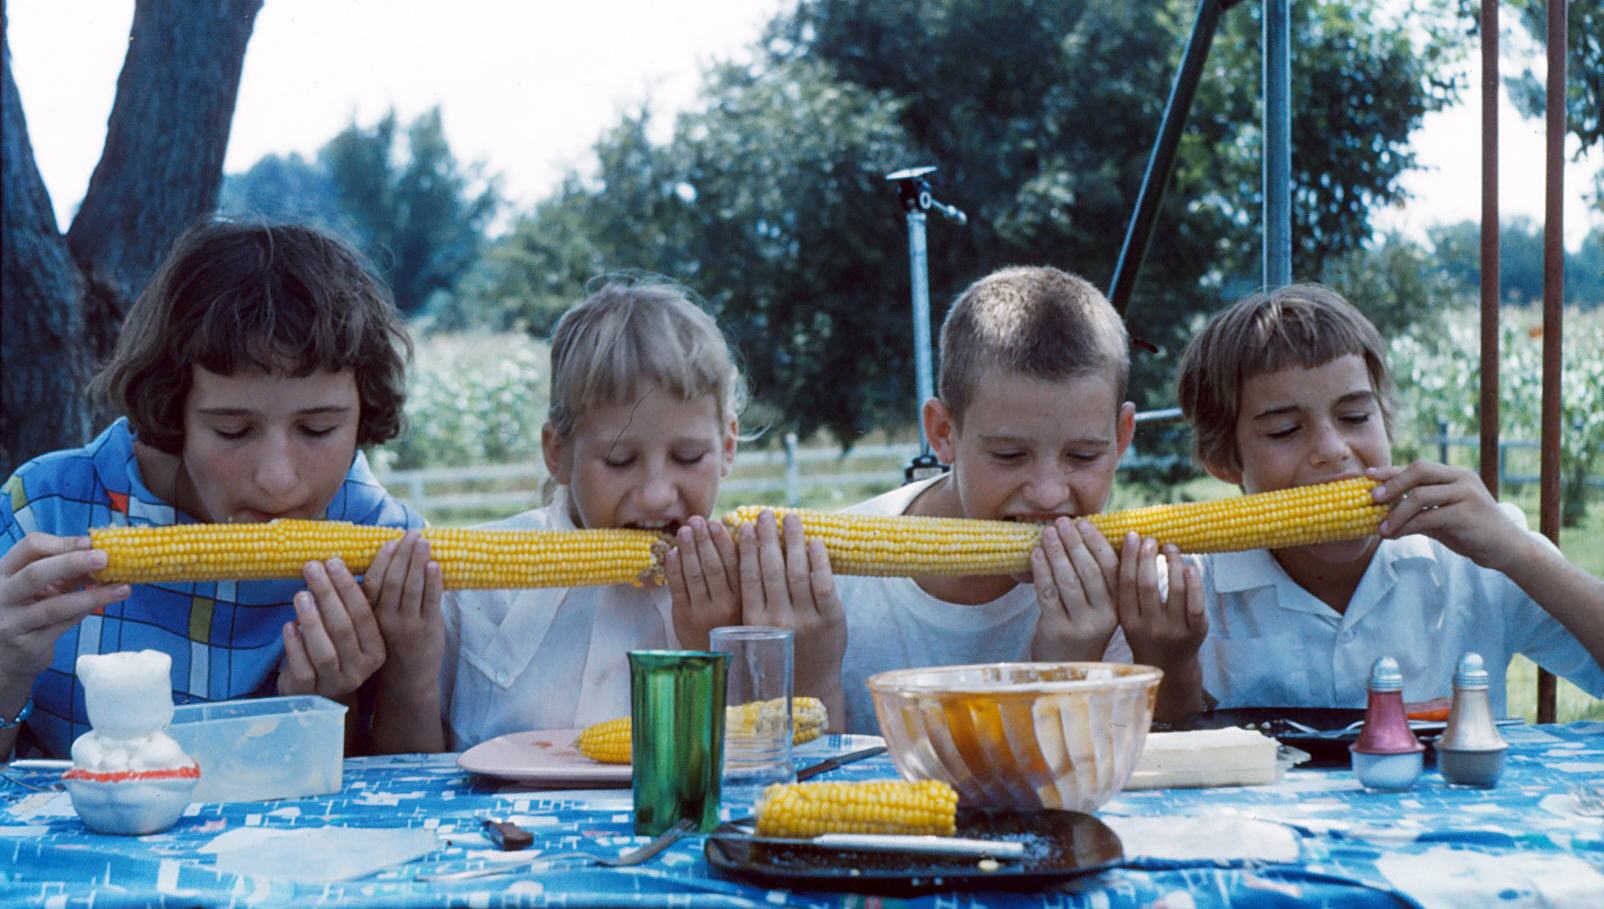 Photo of kids with "giant" ear of corn